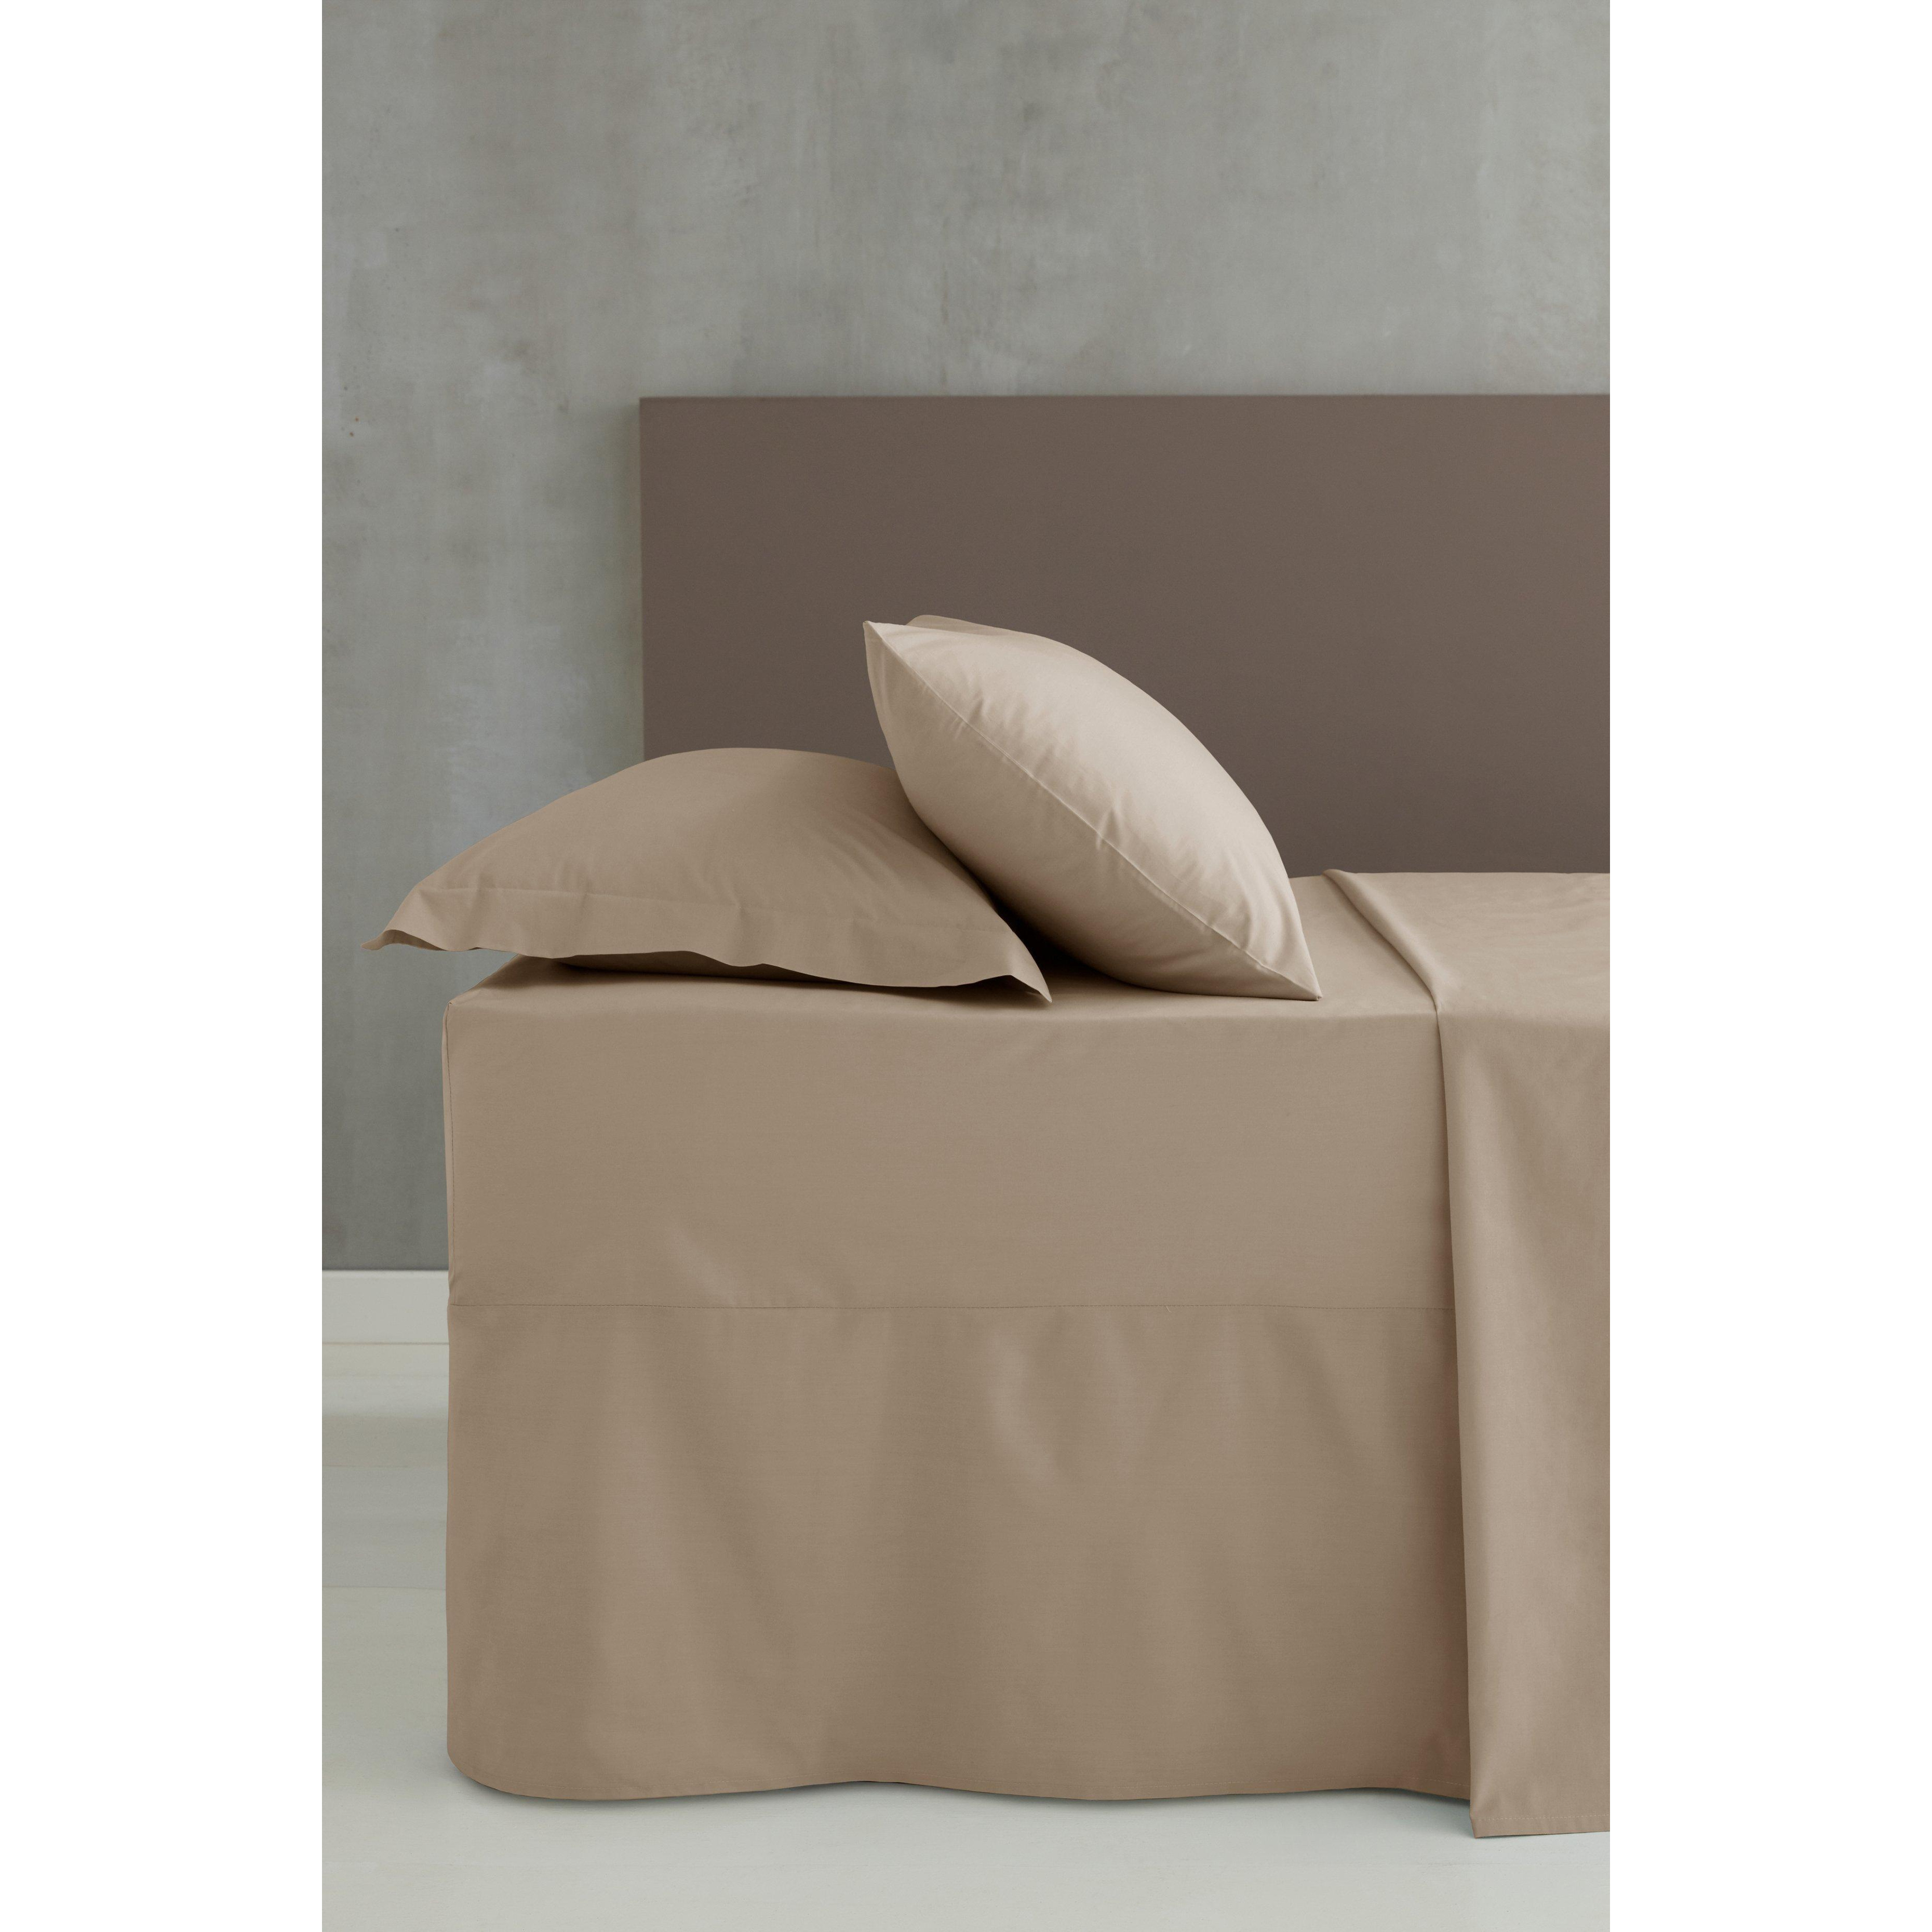 'Easy Iron Percale' Combed Polycotton 25cm Depth Sheet - image 1